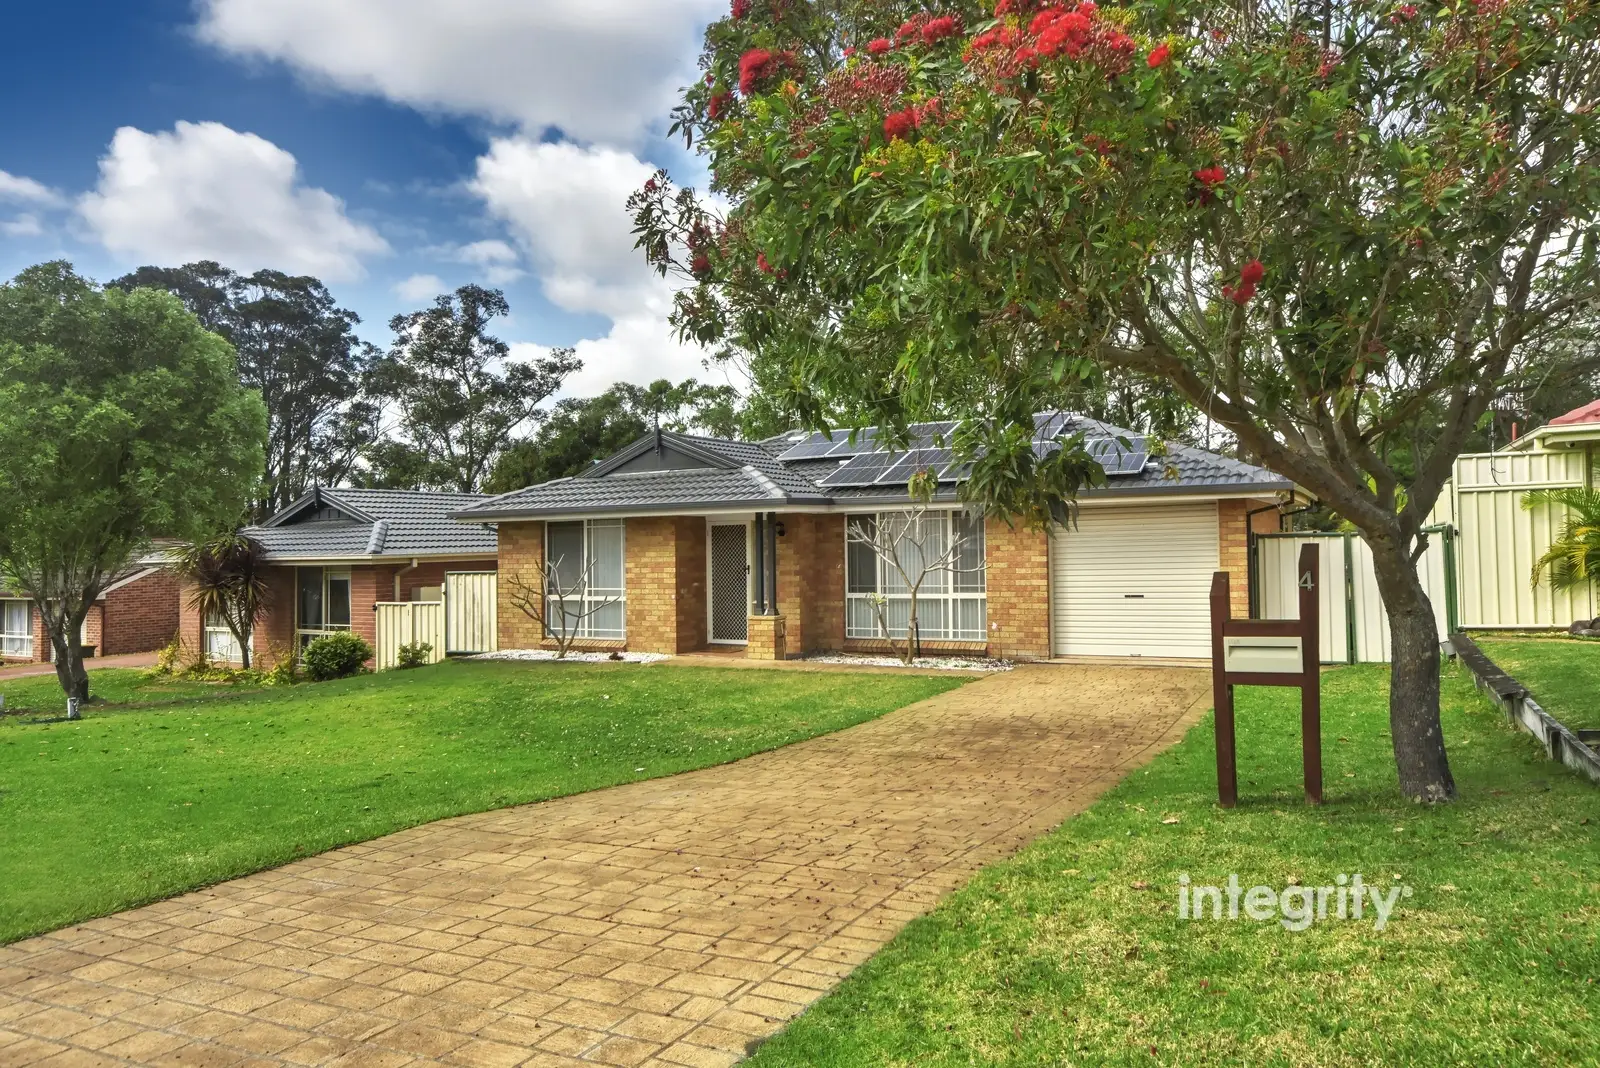 4 Olympic Drive, West Nowra For Sale by Integrity Real Estate - image 2